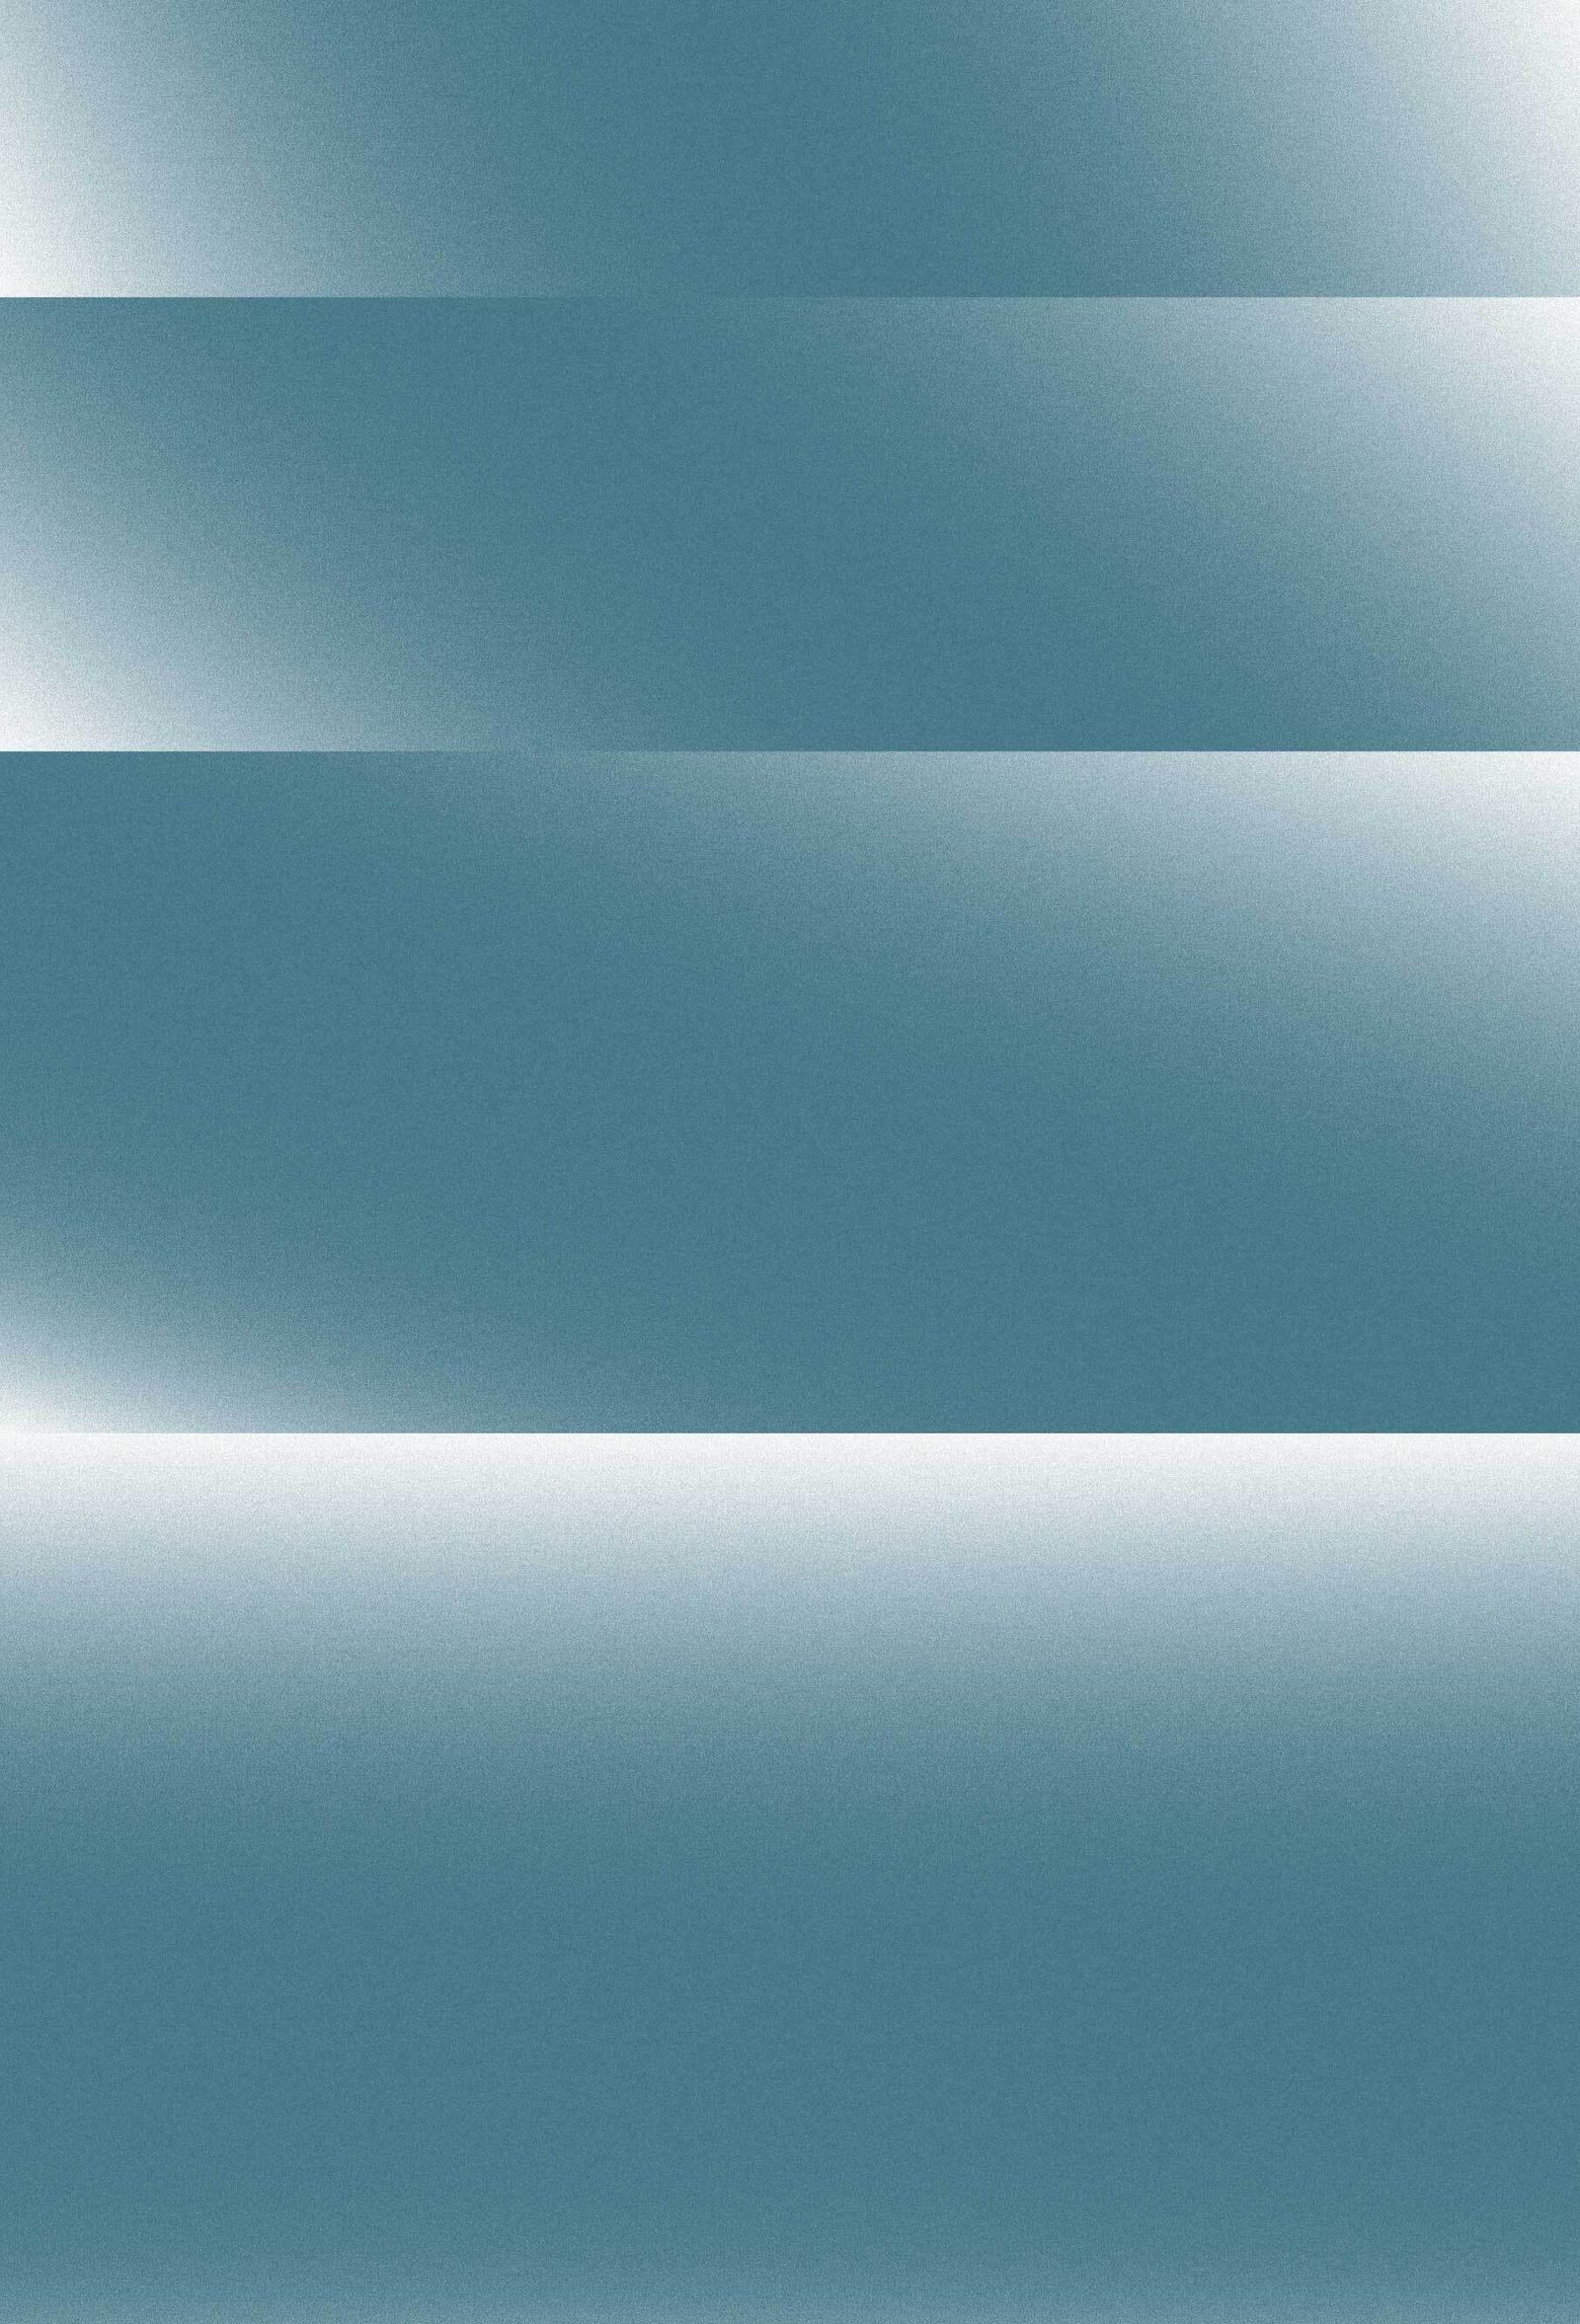 Abstract graphic of blue rectangles